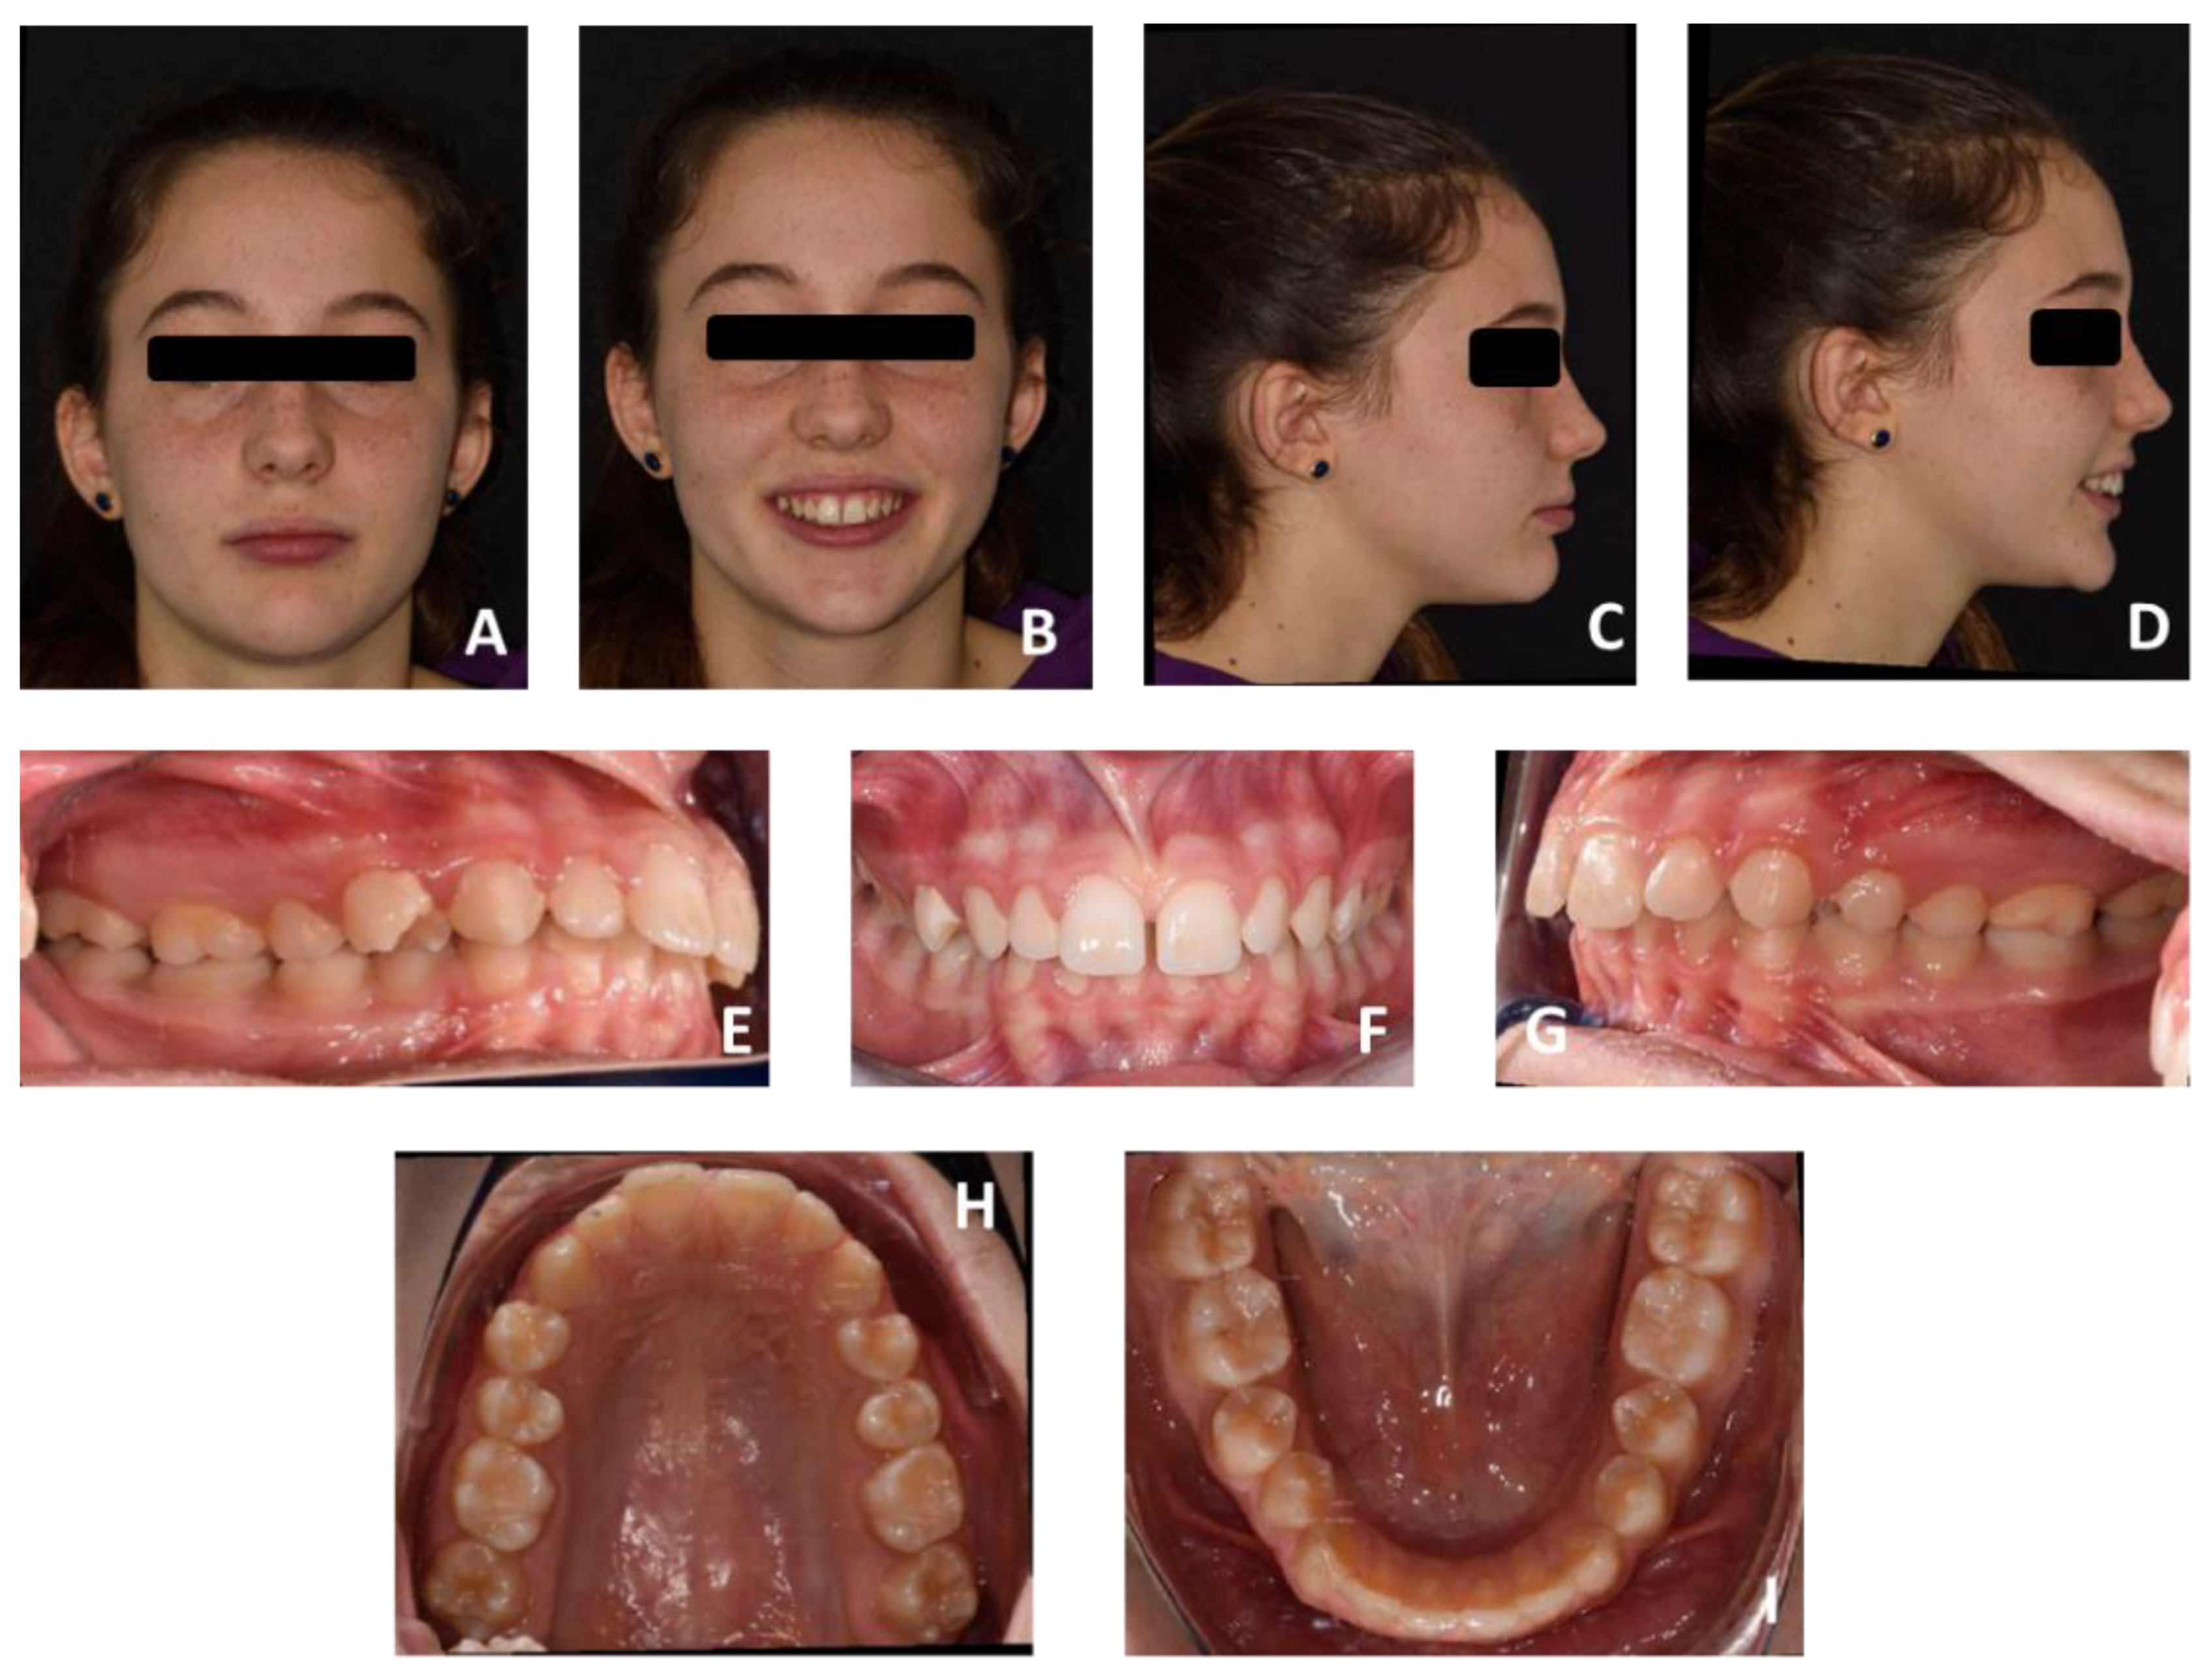 Family Braces - 😢 Problem: Significant Overbite, Deep Bite, Bad Bite at  the Back, and Upper/Lower Crowding 👩🏻‍⚕️ Solution: Bite Corrector +  Invisalign 📆 Treatment Length: 17 months 😁 Results: an Outstanding